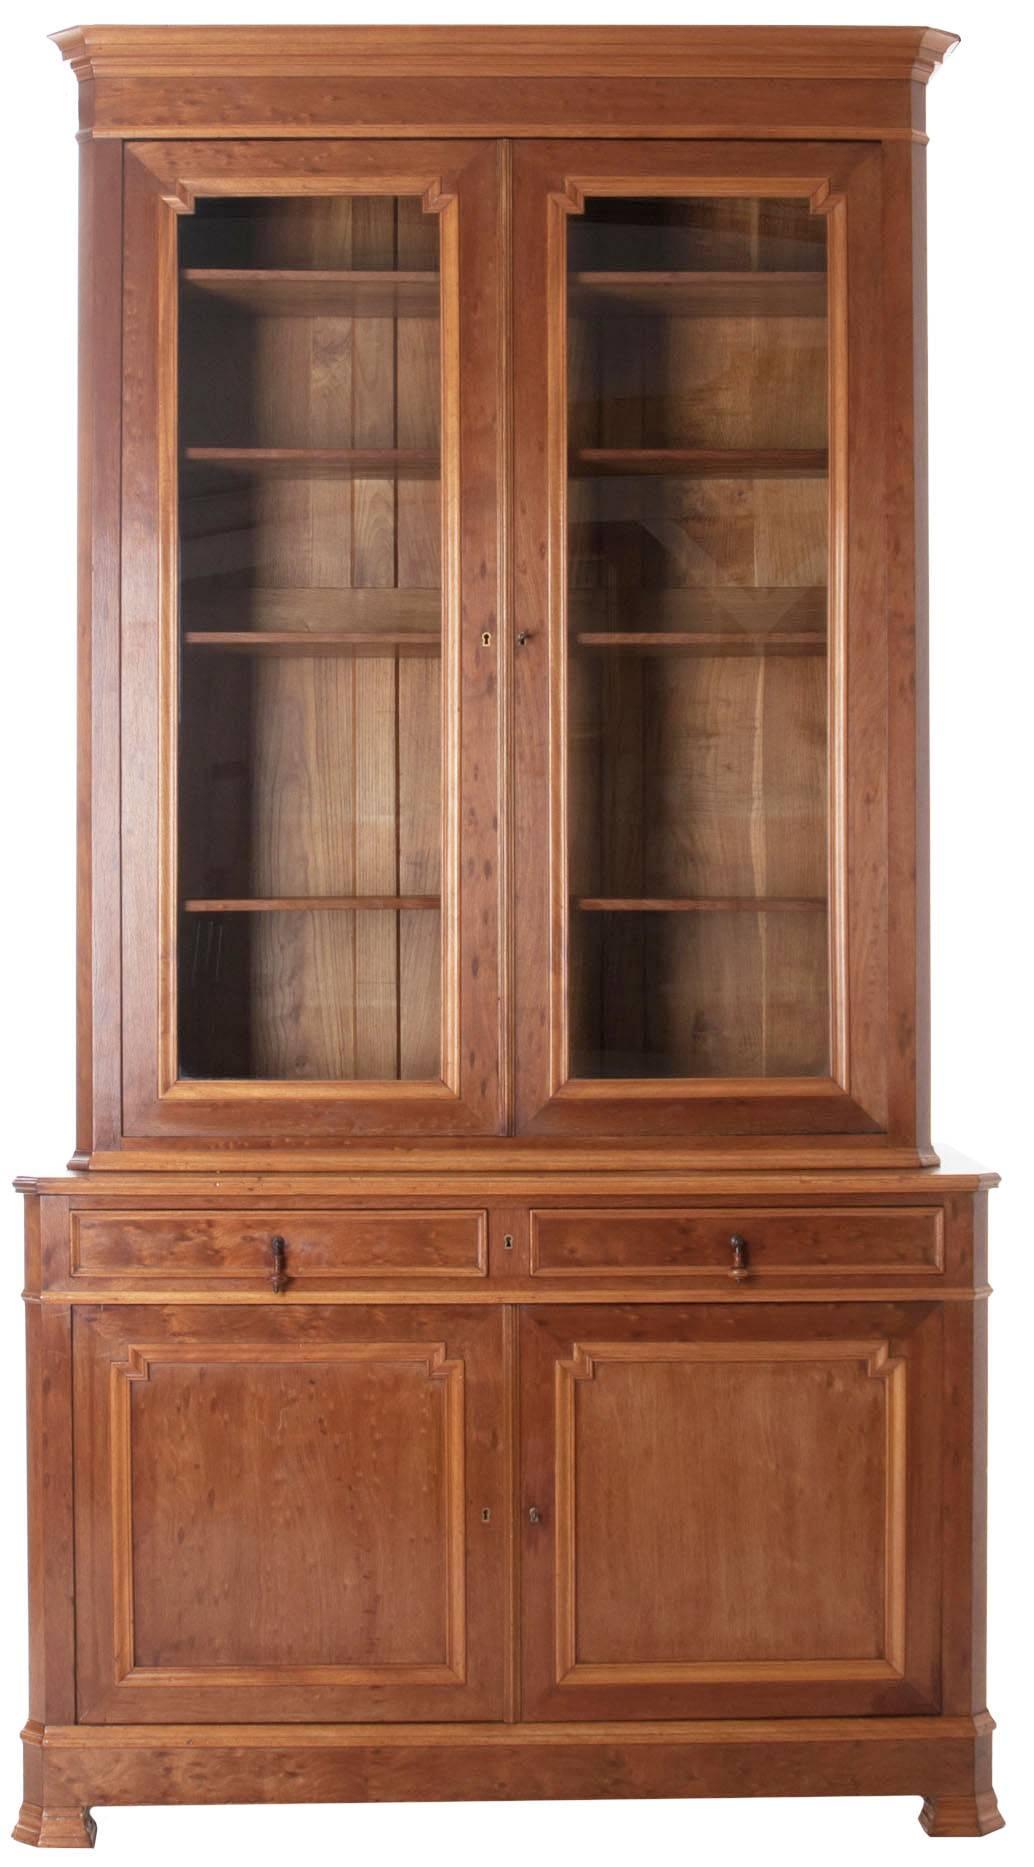 French Louis Philippe bibliotheque in bird's-eye mahogany. Wonderful crown over bibliotheque of two glass locking doors over its buffet of two drawers and two doors. Four adjustable shelves in top and one fitted shelf in bottom, behind closed doors.